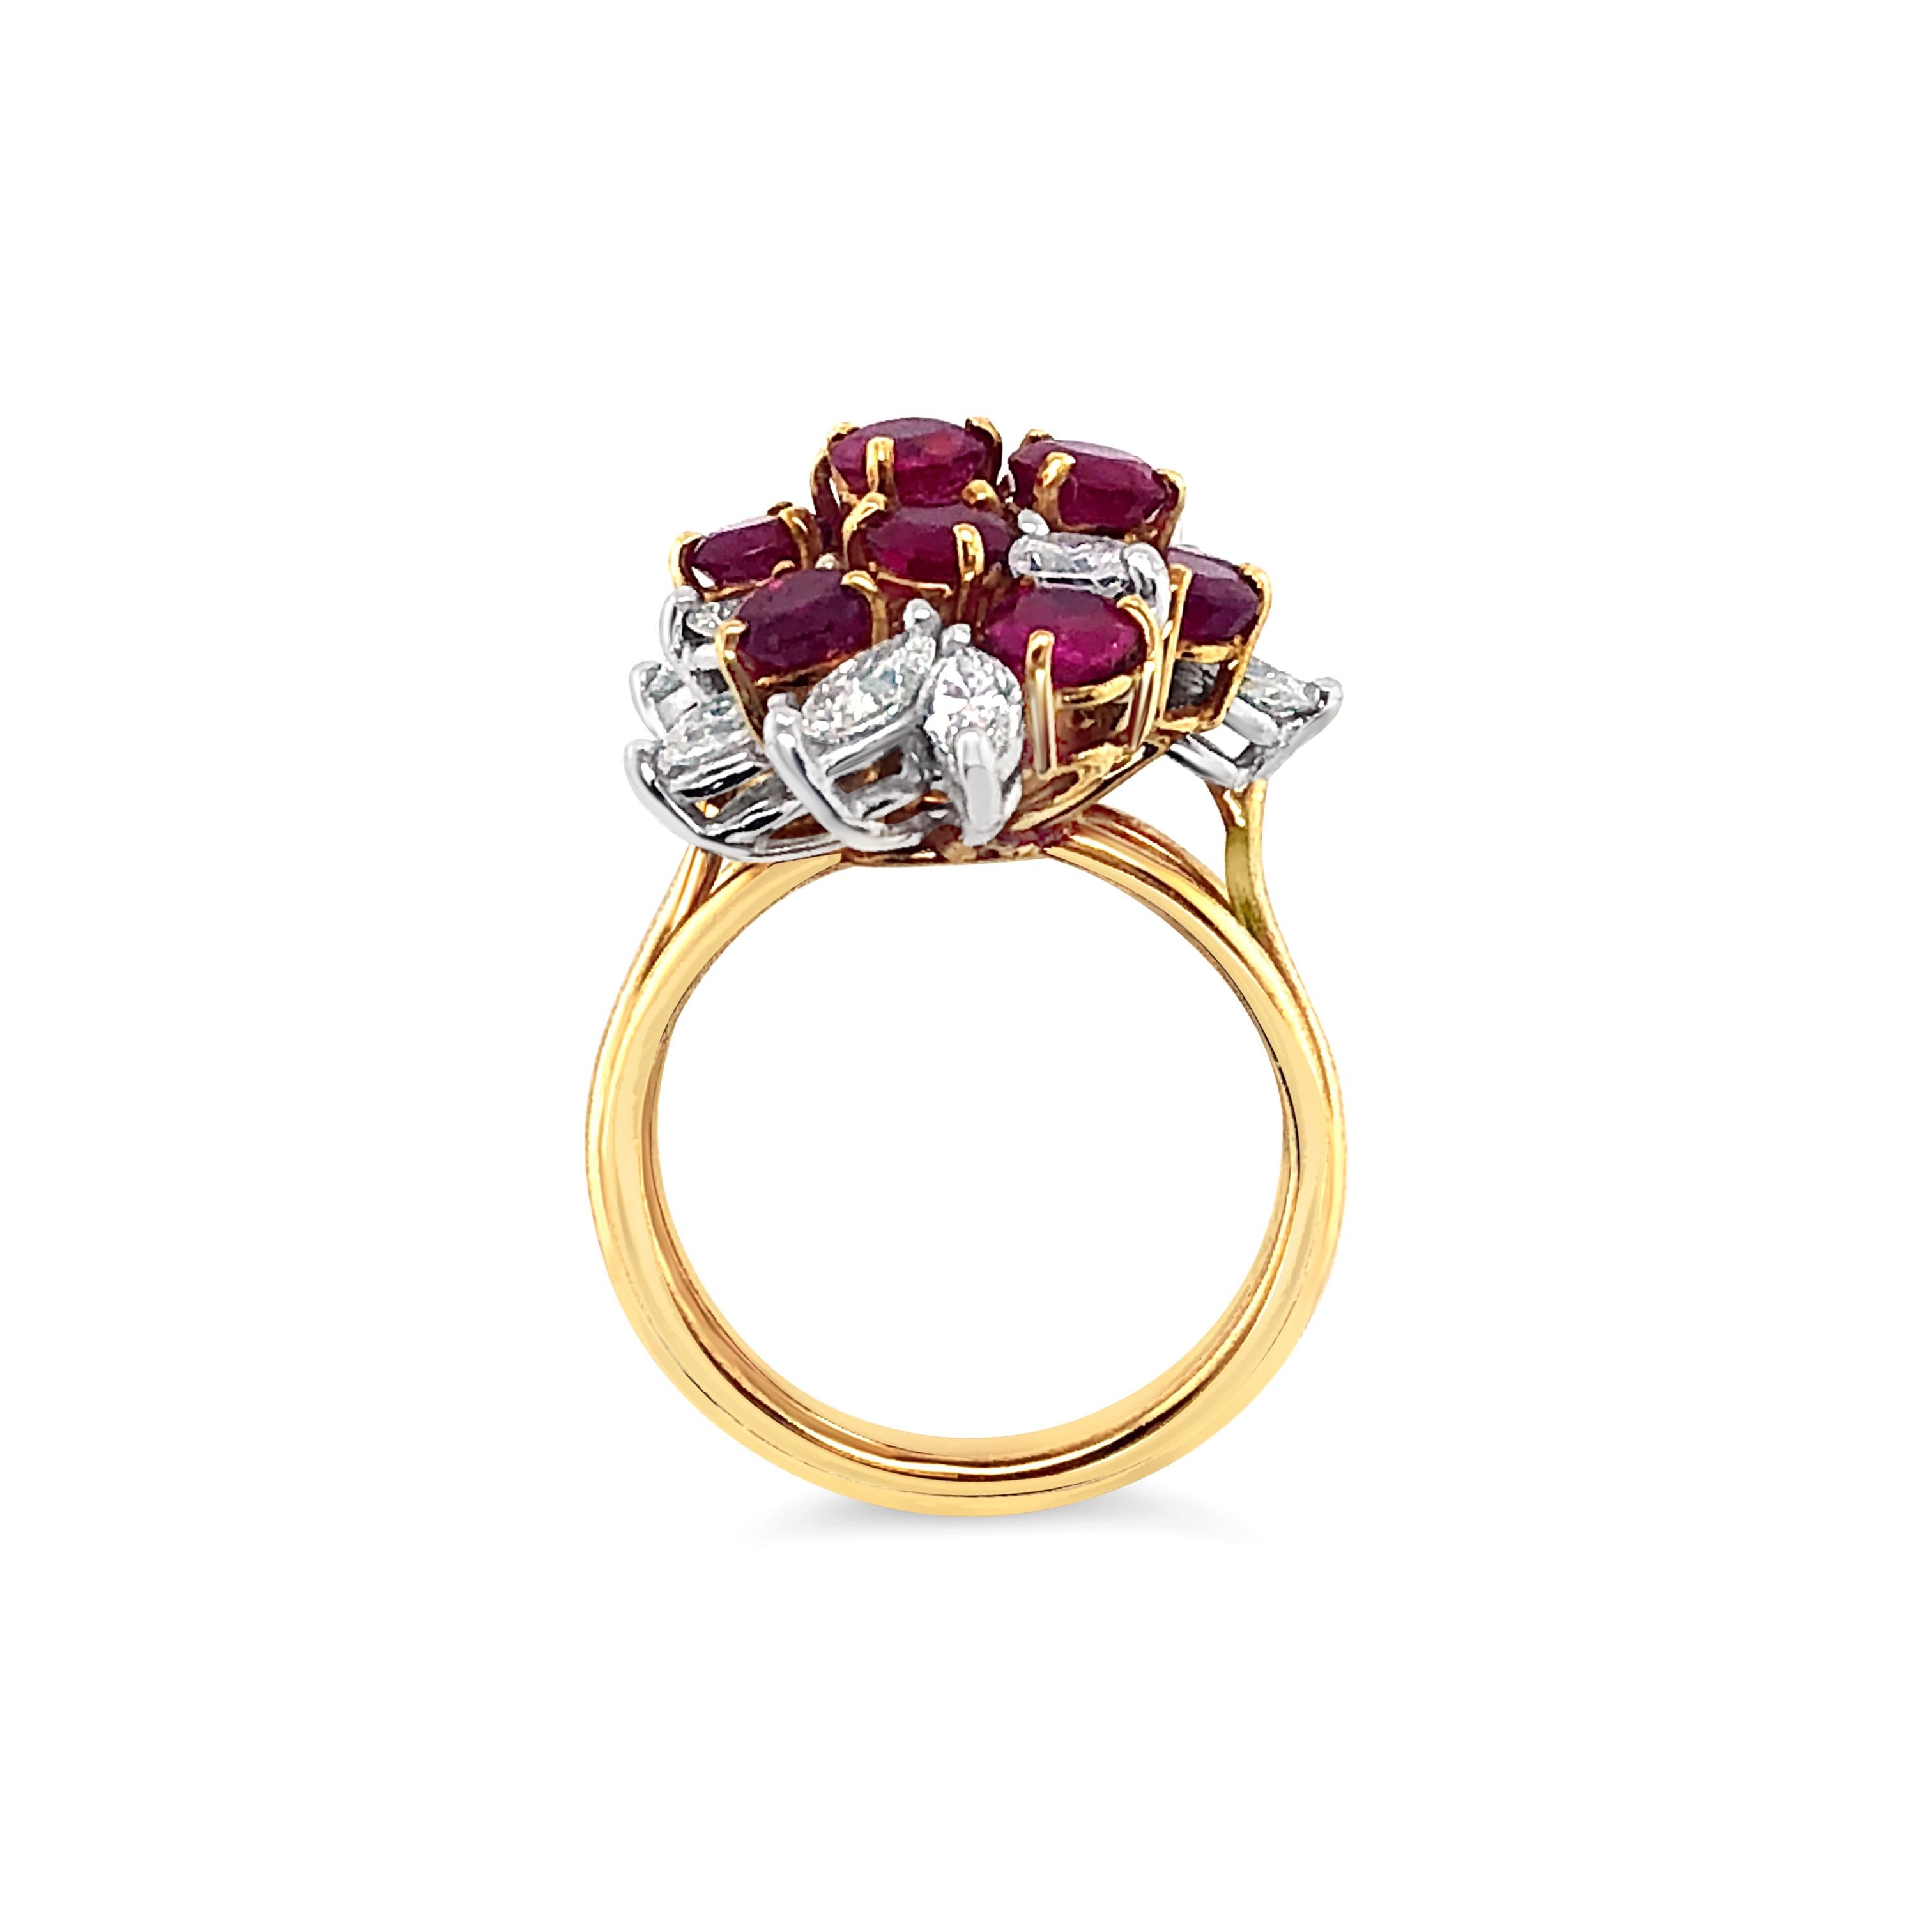 2.88 Carat (total weight) Round Cut Ruby and 1.37 Carat (total weight) Marquise Cut Diamond Cluster Ring set in 18K Yellow Gold.  Diamonds range in Color I-J, Clarity VS2-SI1 and are set in Platinum.